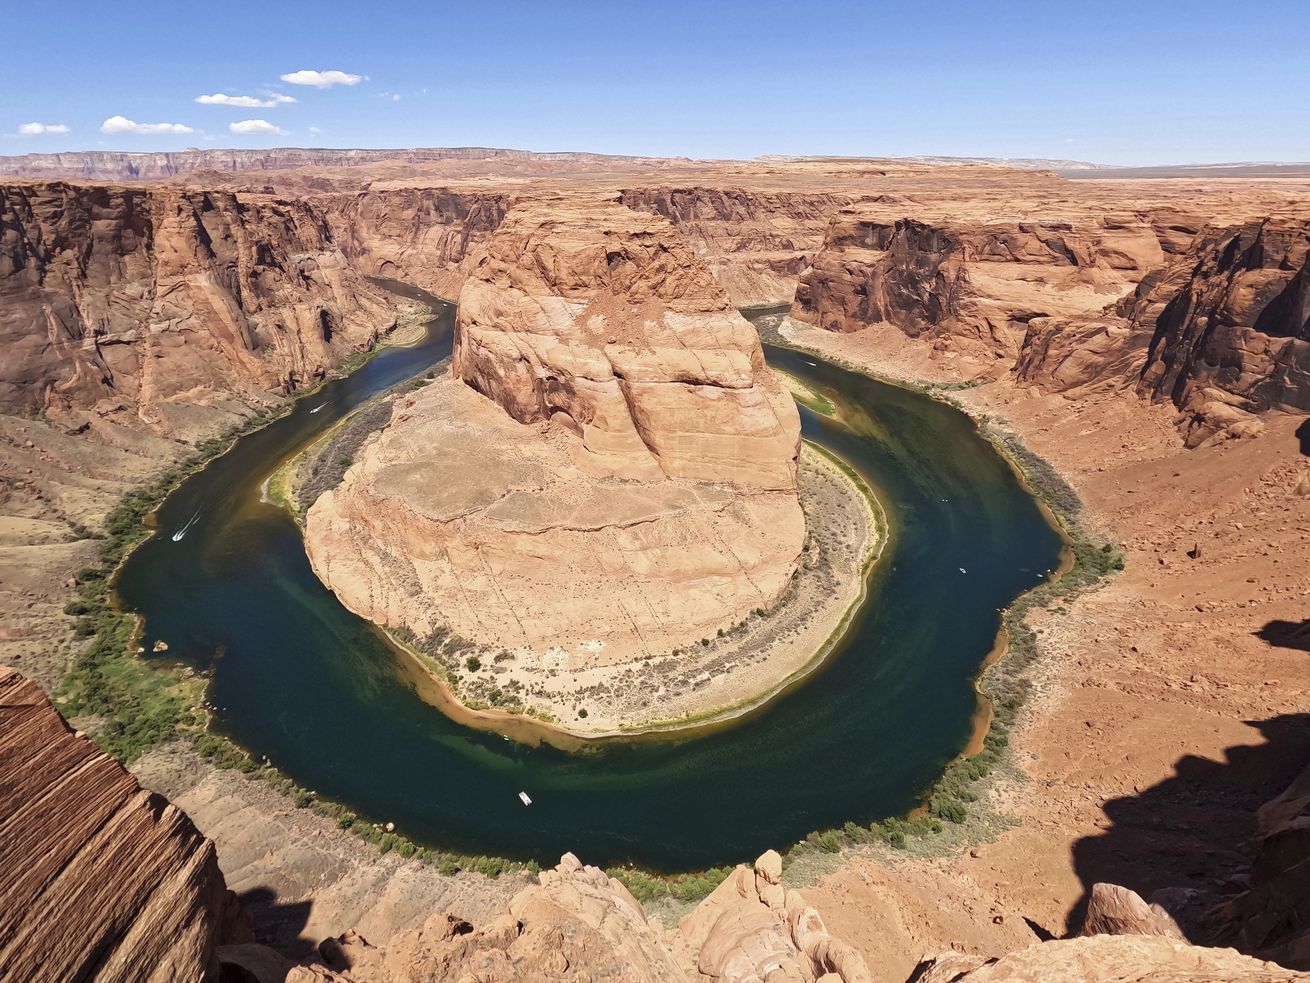 How a 100-year-old miscalculation drained the Colorado River